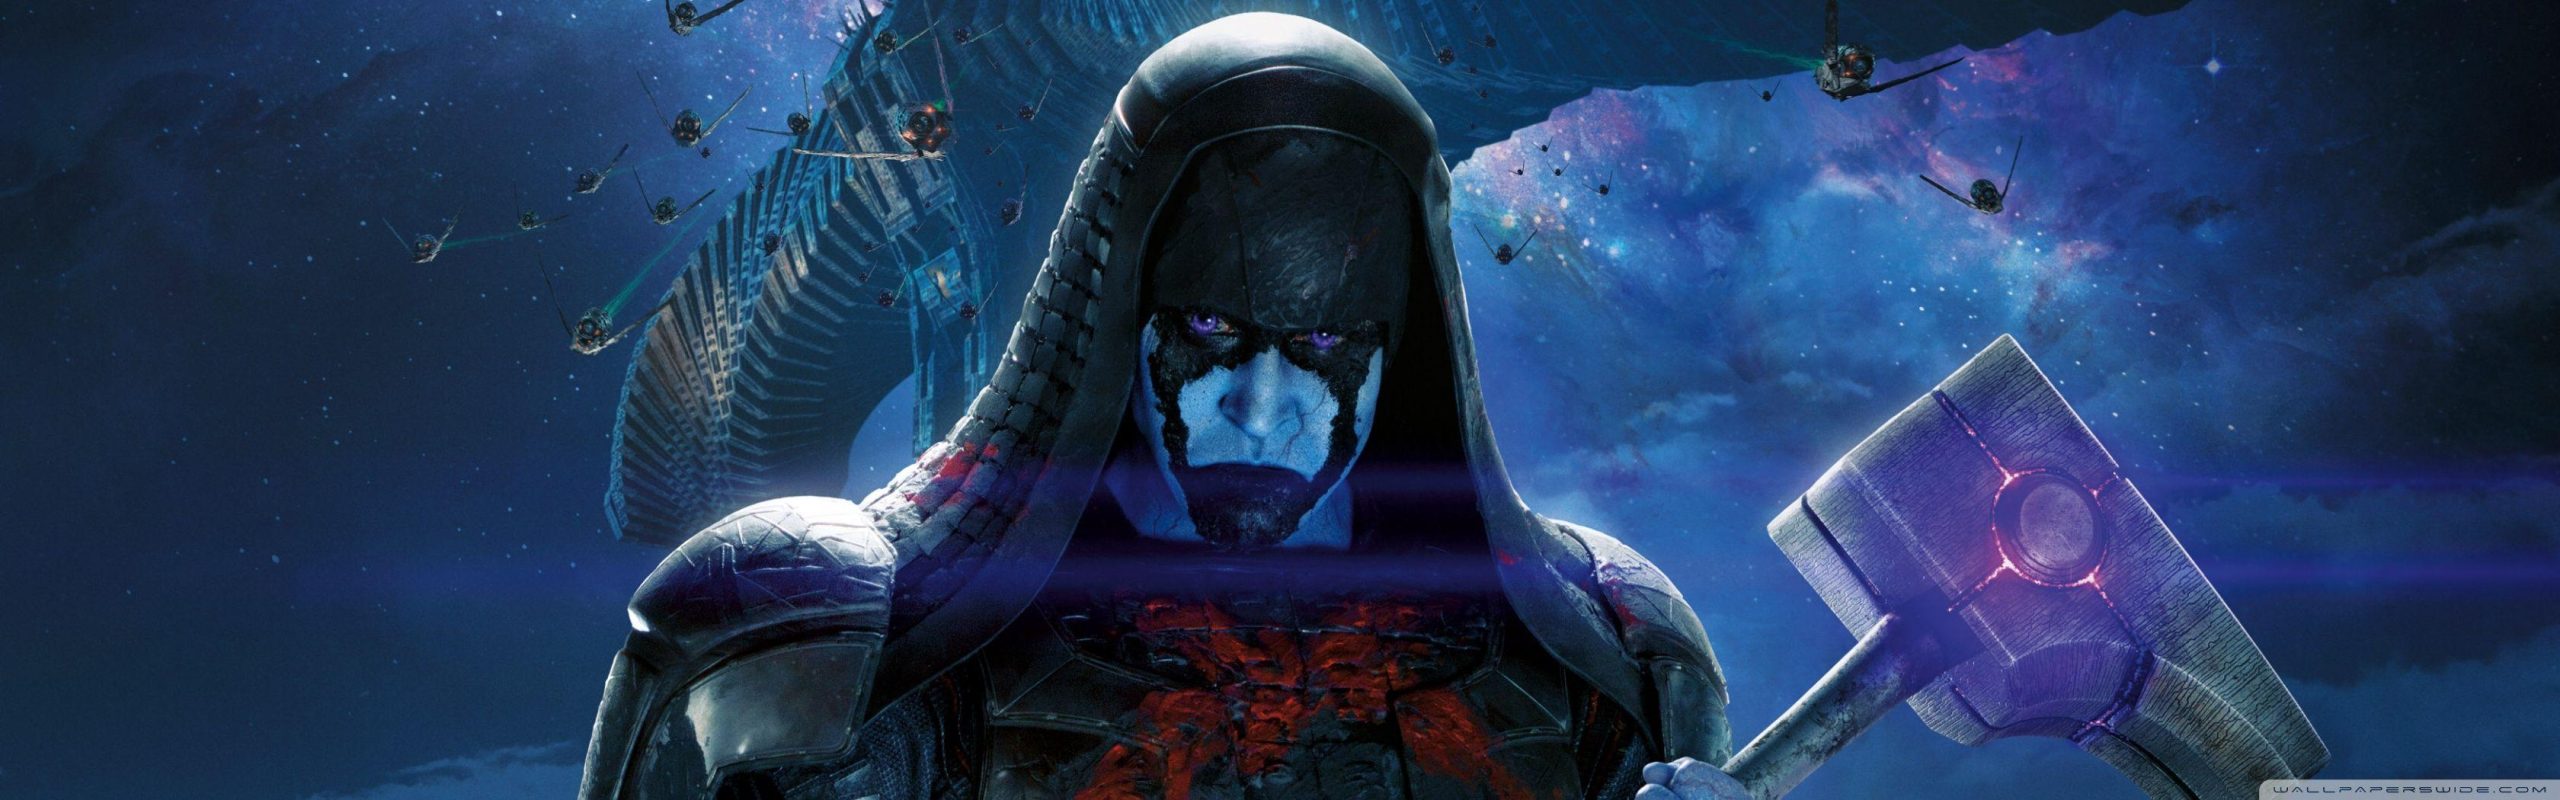 Ronan The Accuser Guardians Of The Galaxy Wallpaper Phone